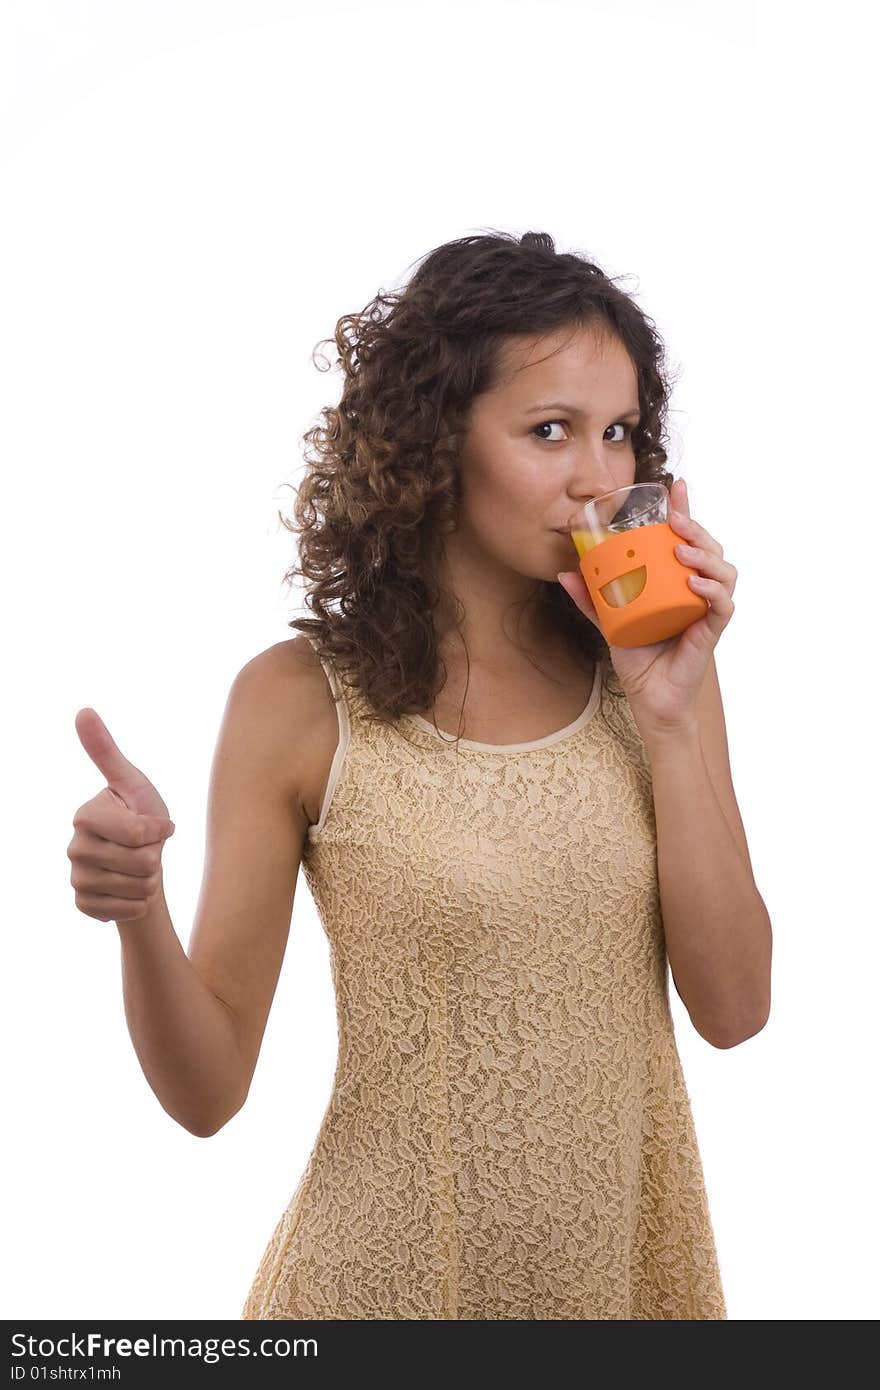 Smiling young healthy woman holding the orange in her hand. Woman is drinking orange juice. Isolated over white background. Girl showing thumbs up on. Happiness woman shows OK. Smiling young healthy woman holding the orange in her hand. Woman is drinking orange juice. Isolated over white background. Girl showing thumbs up on. Happiness woman shows OK.